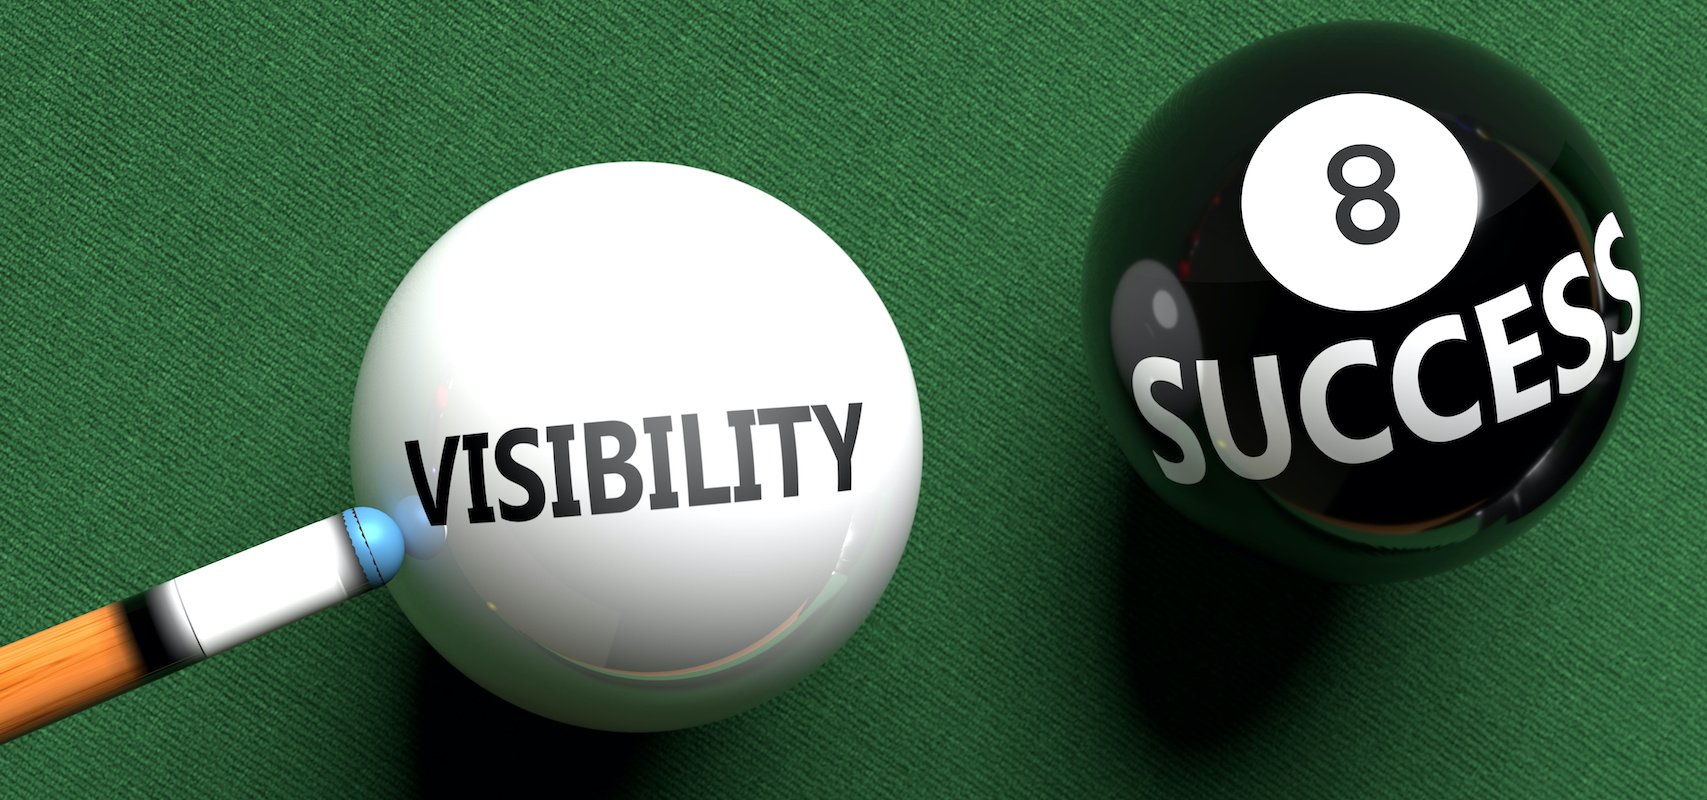 Financial advisor website visibility and success as depicted by a pool shot to the 8 ball